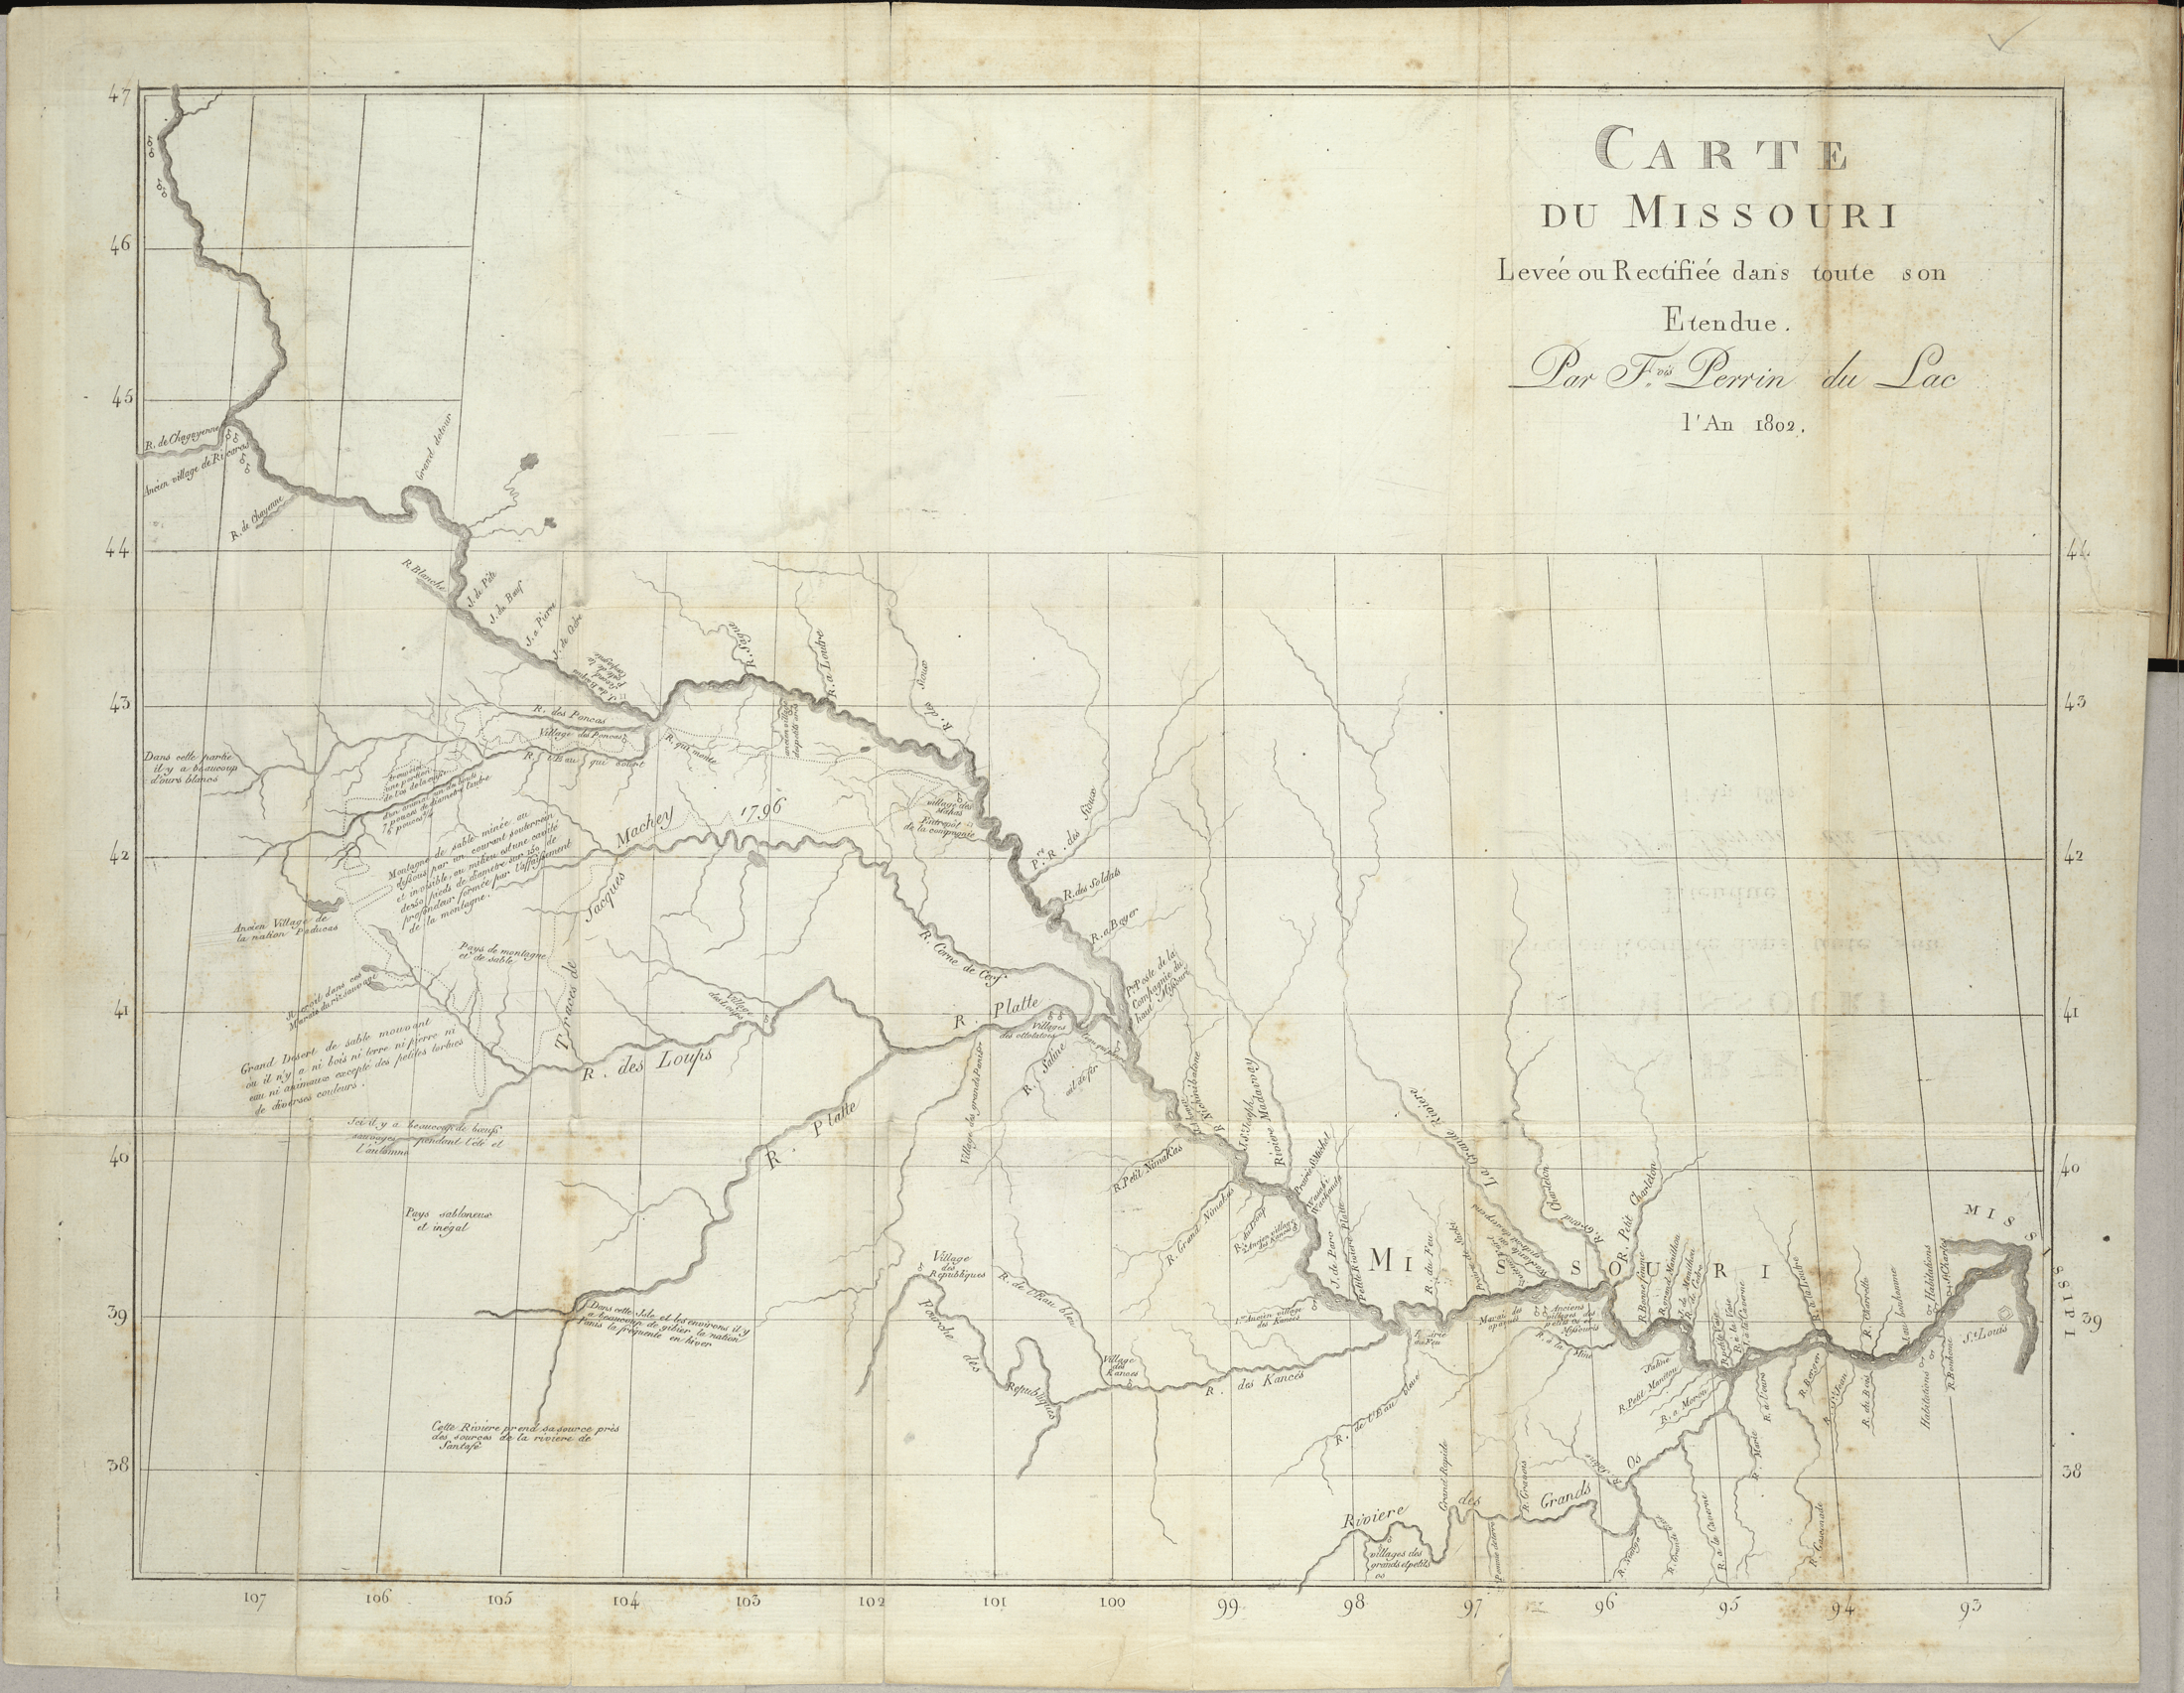 Perrin du Lac’s "Map of the Banks of the Missouri River" (1802), locates the Pawnee Republic (Village des Republic) on the Republican Fork of the Kansas River